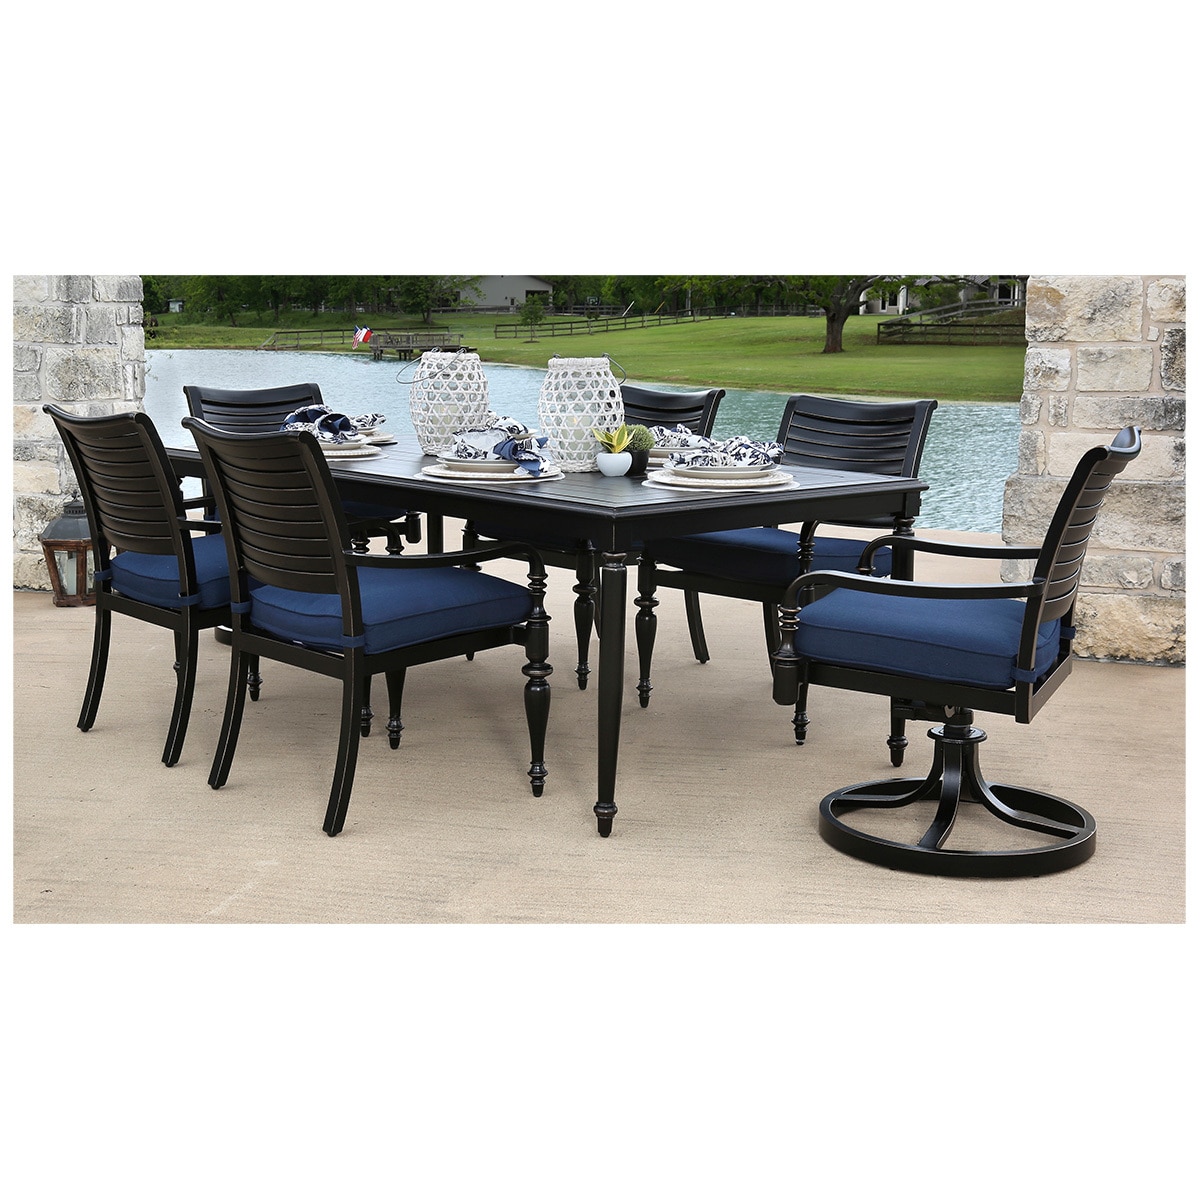 ABY Plantation 7 Piece Dining Set Blue